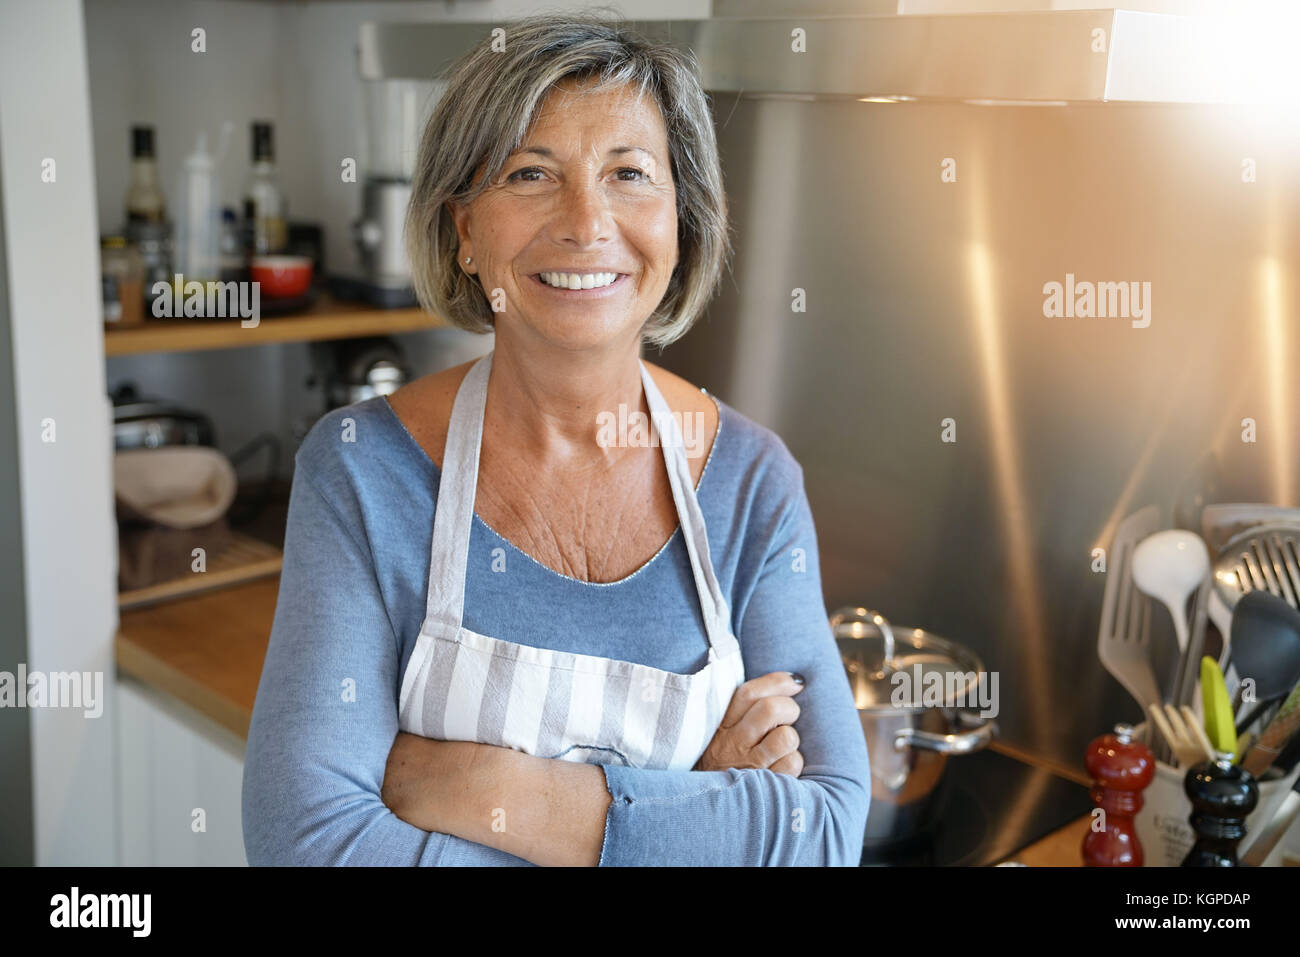 Cheerful Senior woman standing by stove in kitchen Stock Photo